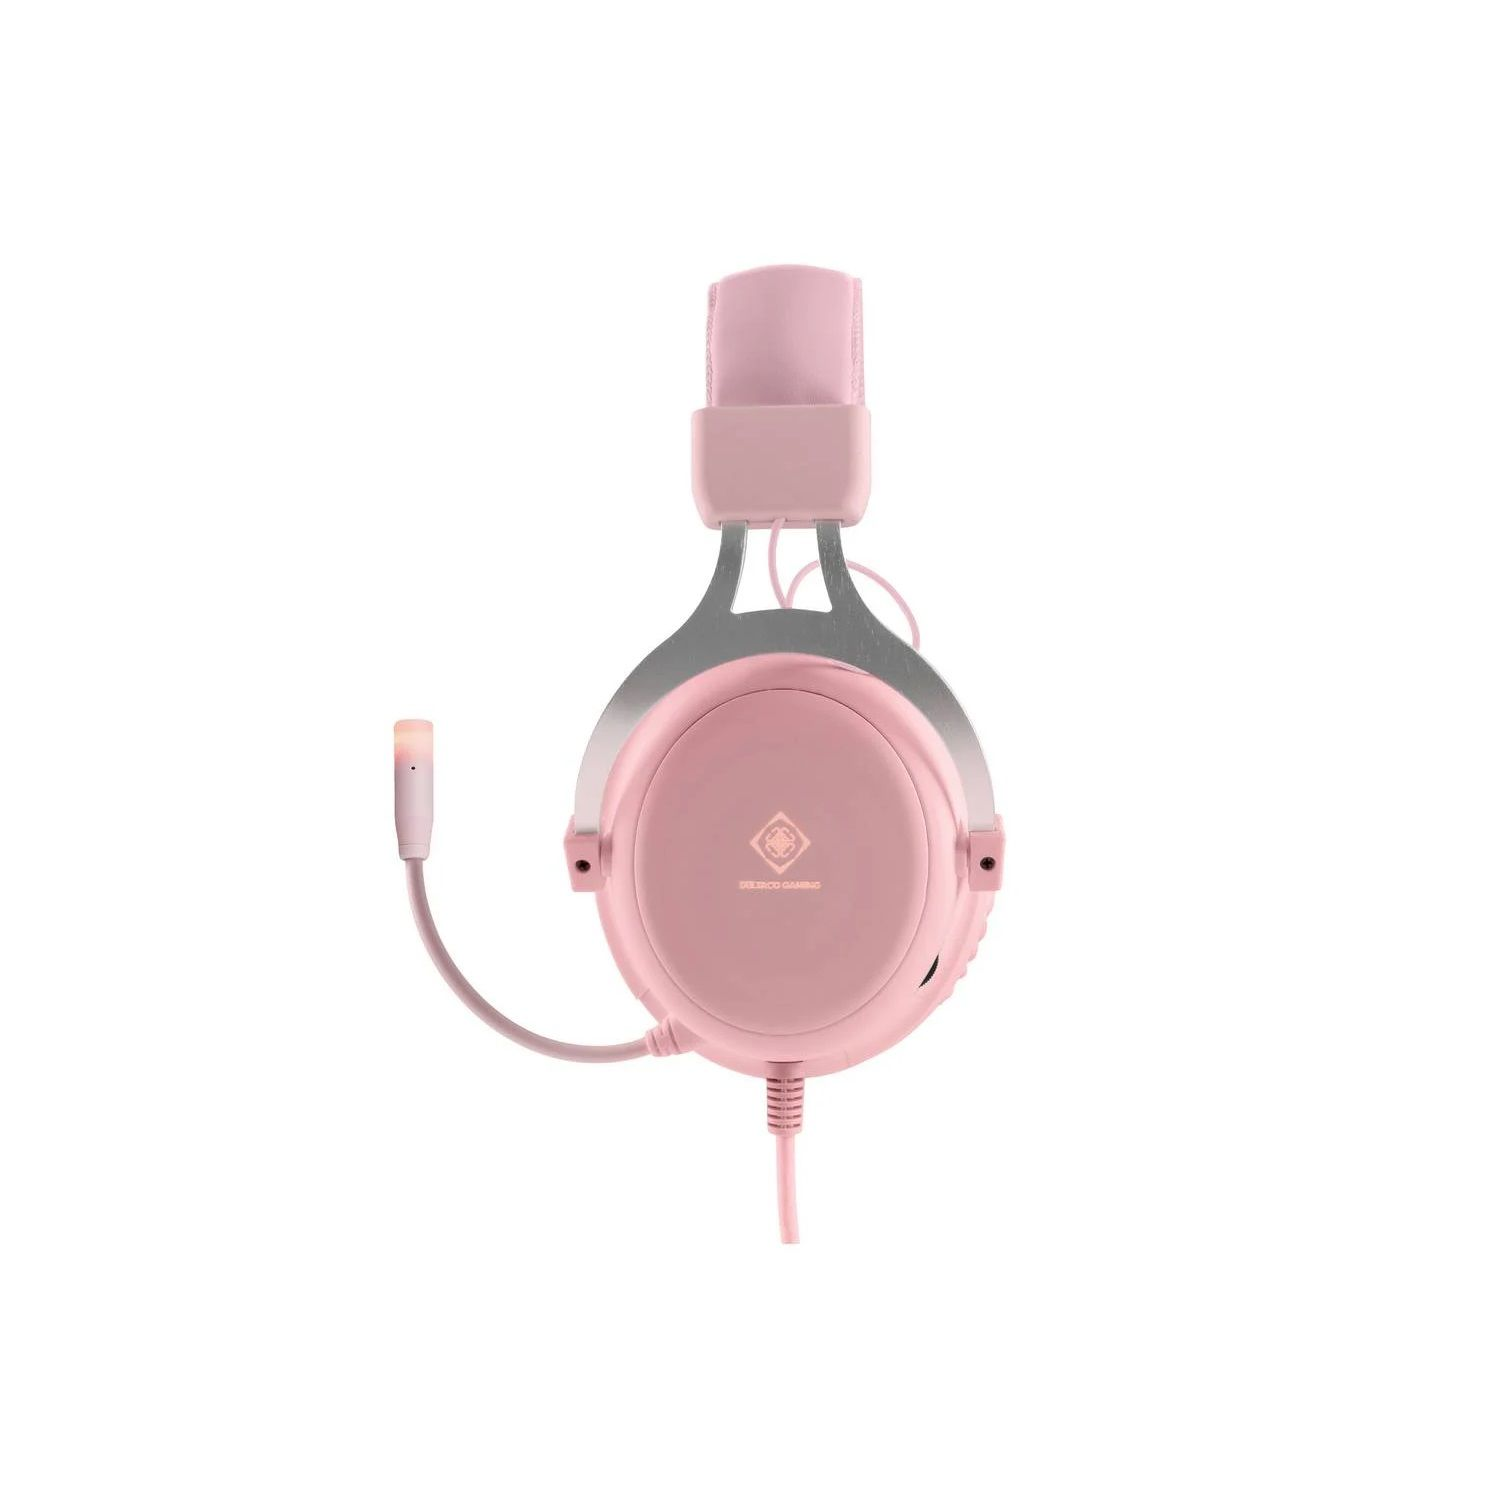 Gamer mit pink Headset Headset GAMING Over-ear LED-Beleuchtung, DELTACO